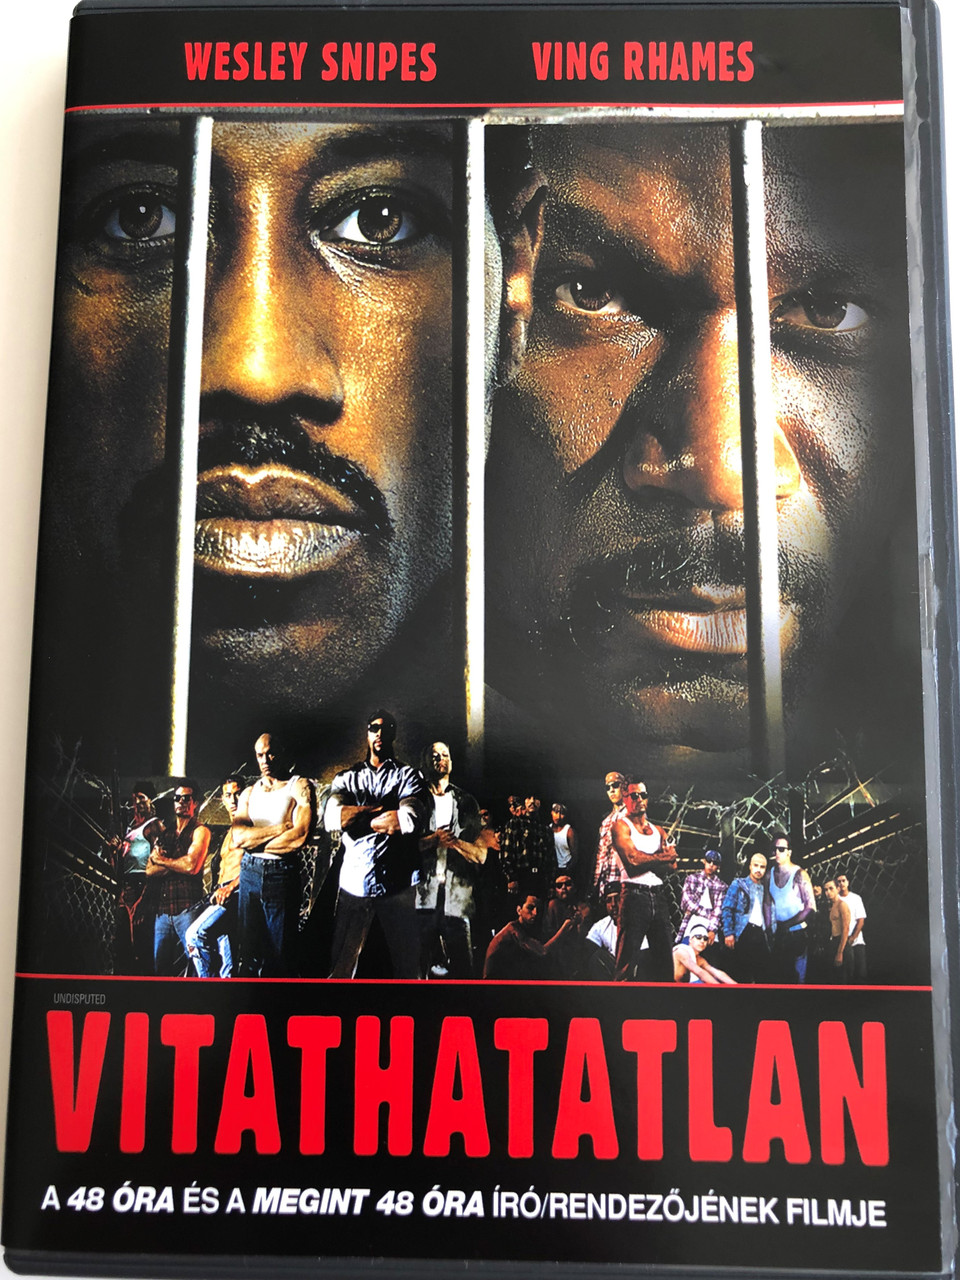 Undisputed DVD 2002 Vitathatatlan / Directed by Walter Hill / Starring:  Wesley Snipes, Ving Rhames / From the director of 48 hours & Another 48  hours - bibleinmylanguage